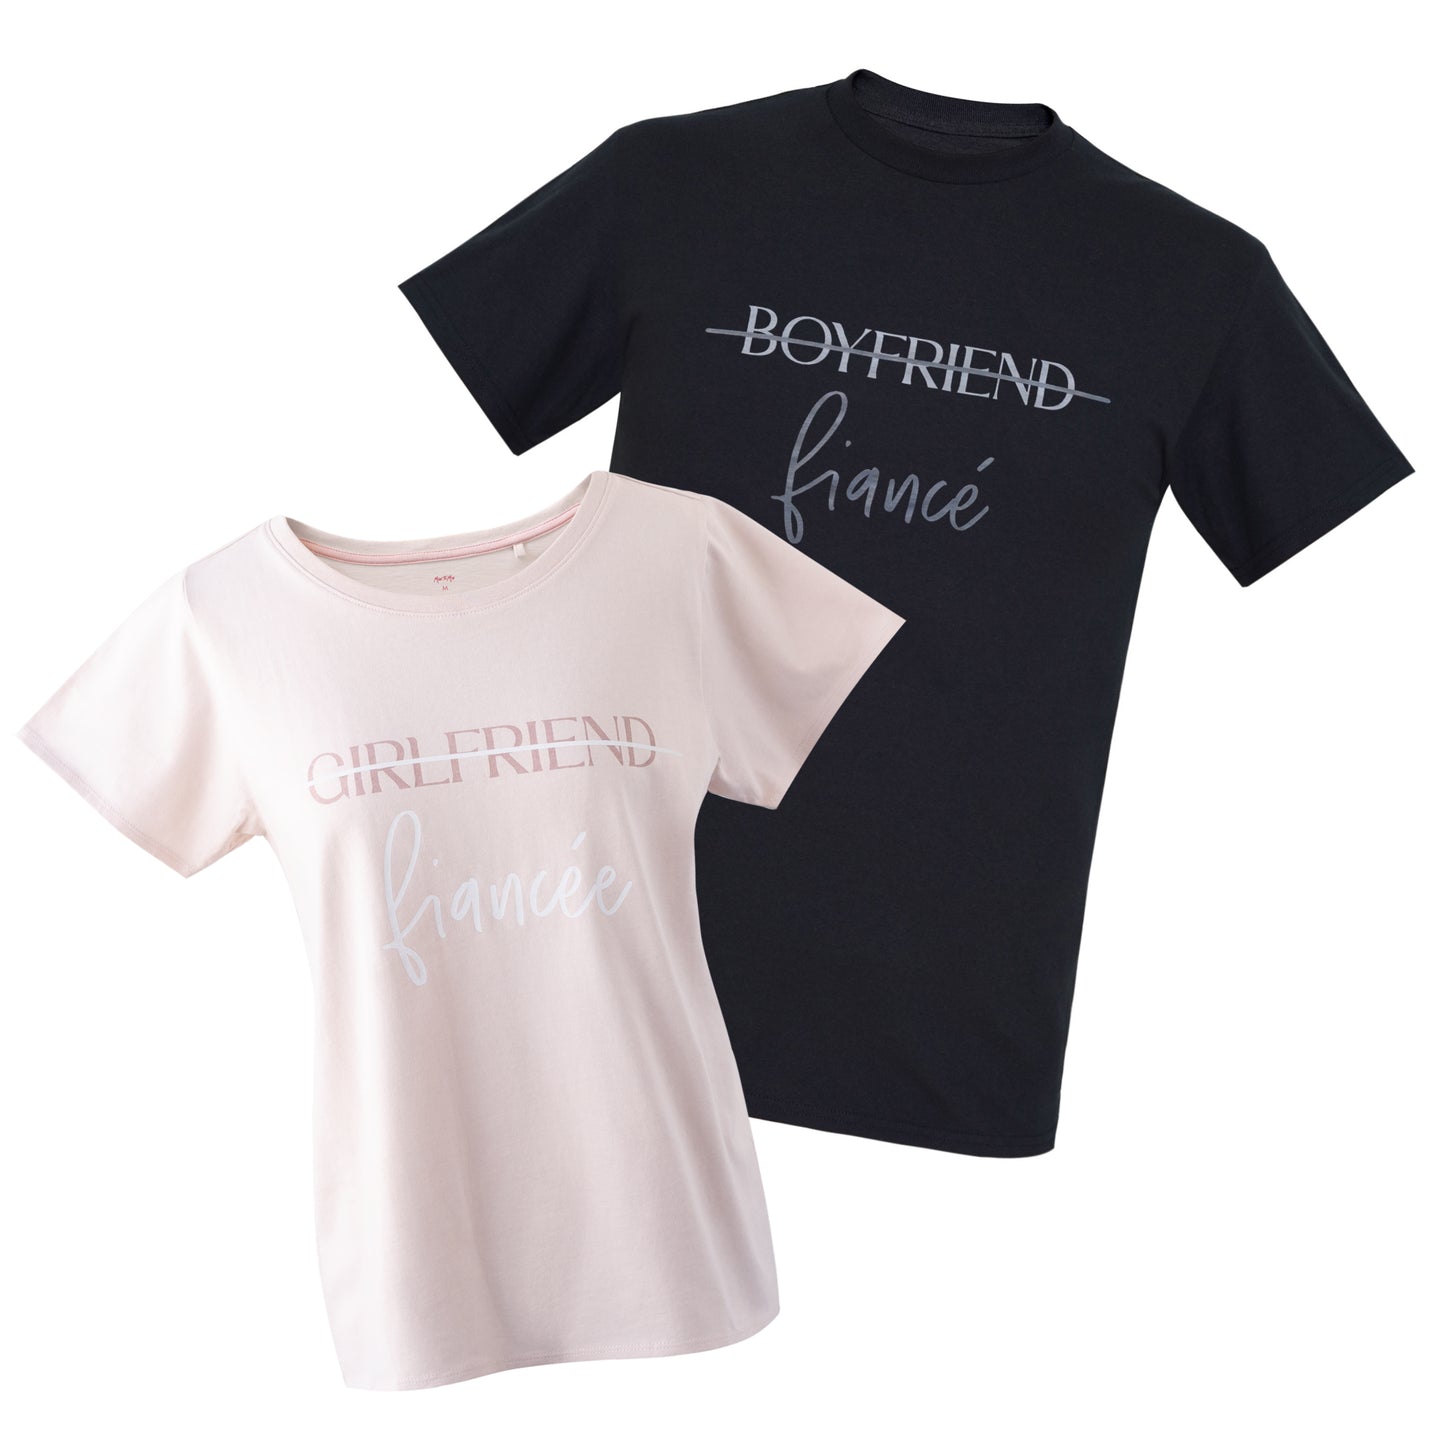 Matching T-shirts for bride and groom. Pink Girlfriend To Fiancee T-shirt and black Boyfriend To Fiance T-shirt.